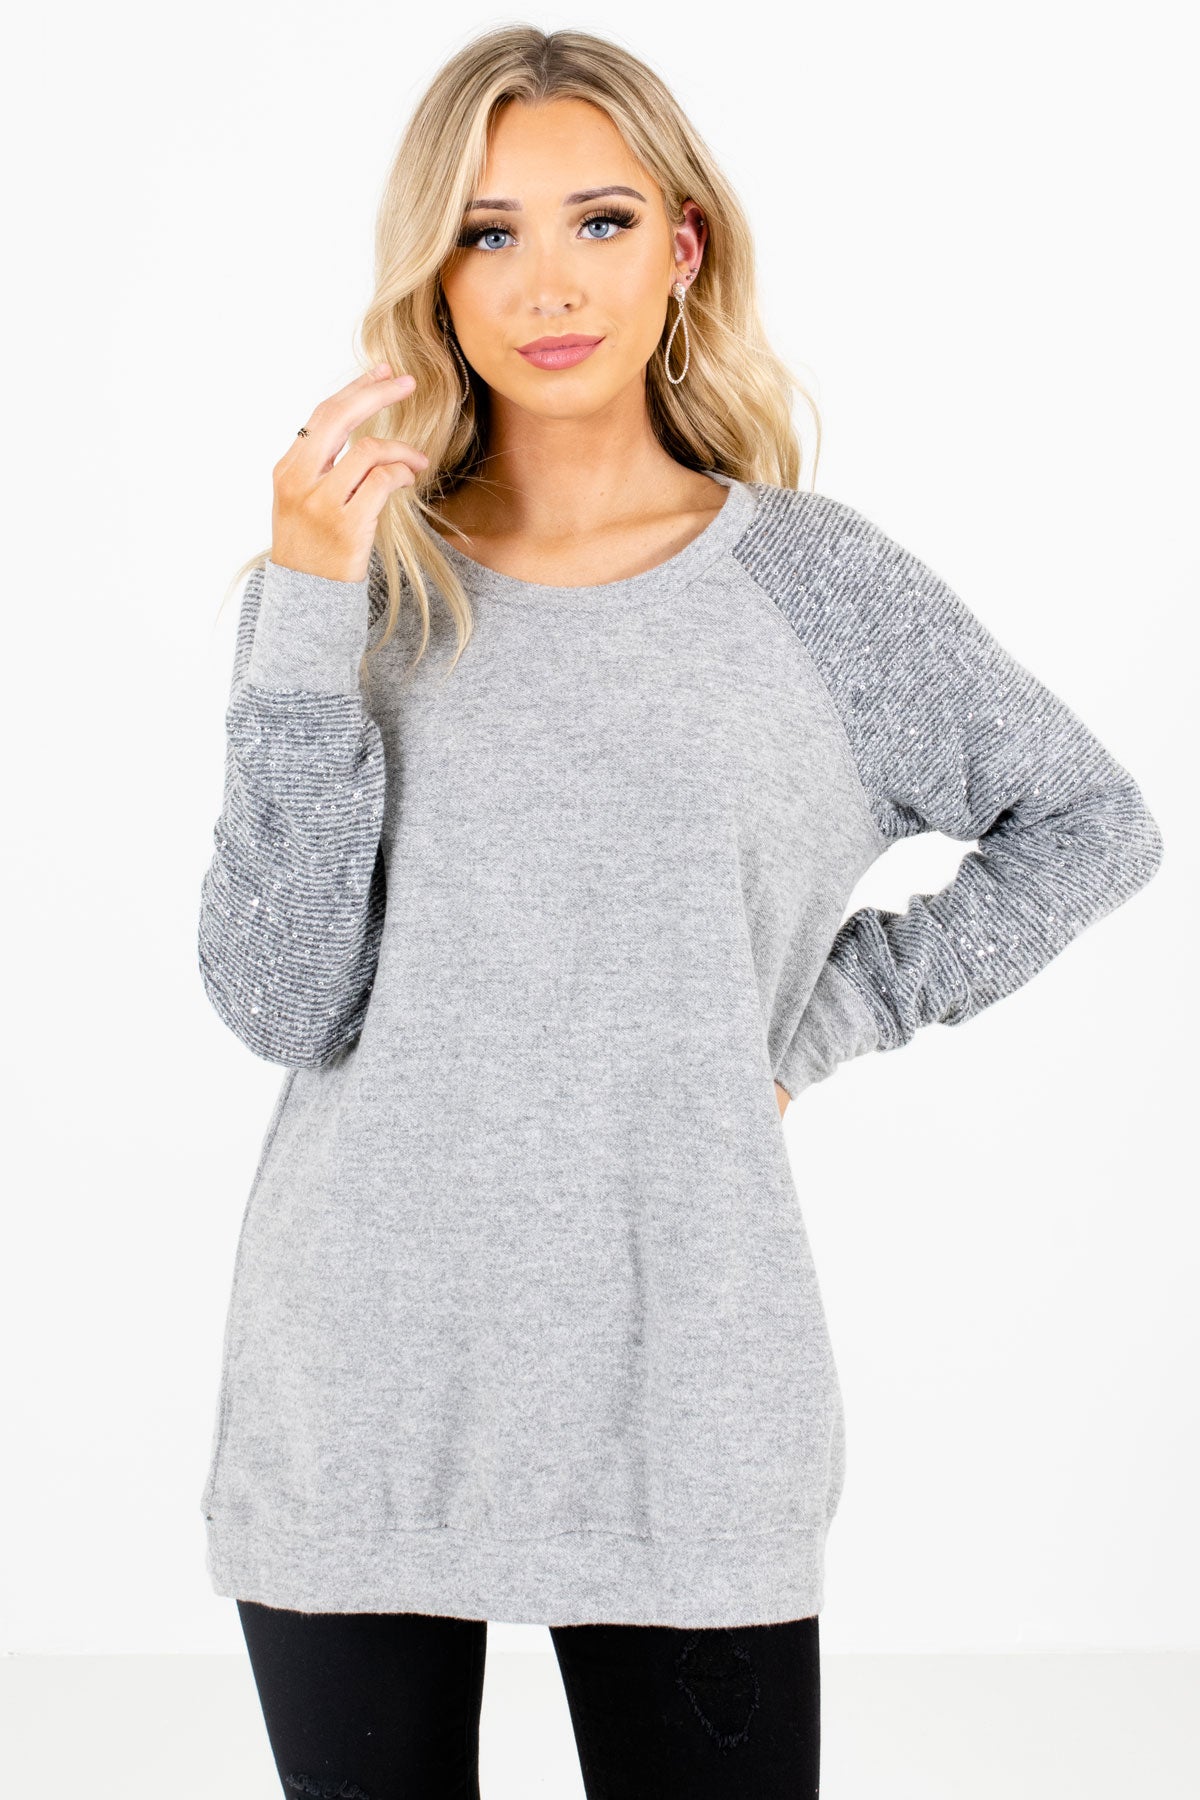 Gray High-Quality Soft Material Boutique Sweaters for Women